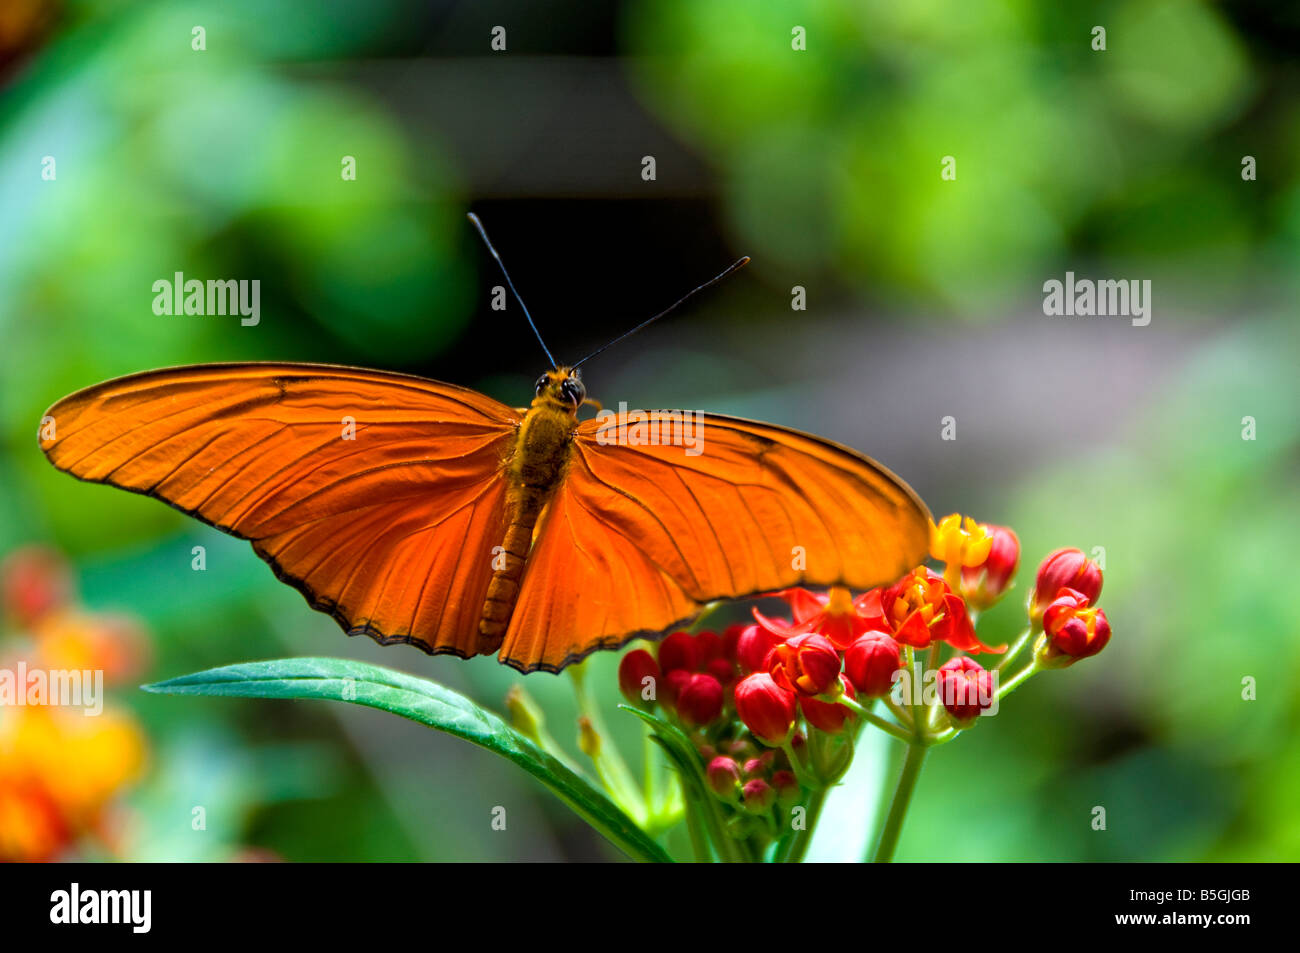 BUTTERFLY Orange and black butterfly in a natural lush habitat Stock Photo